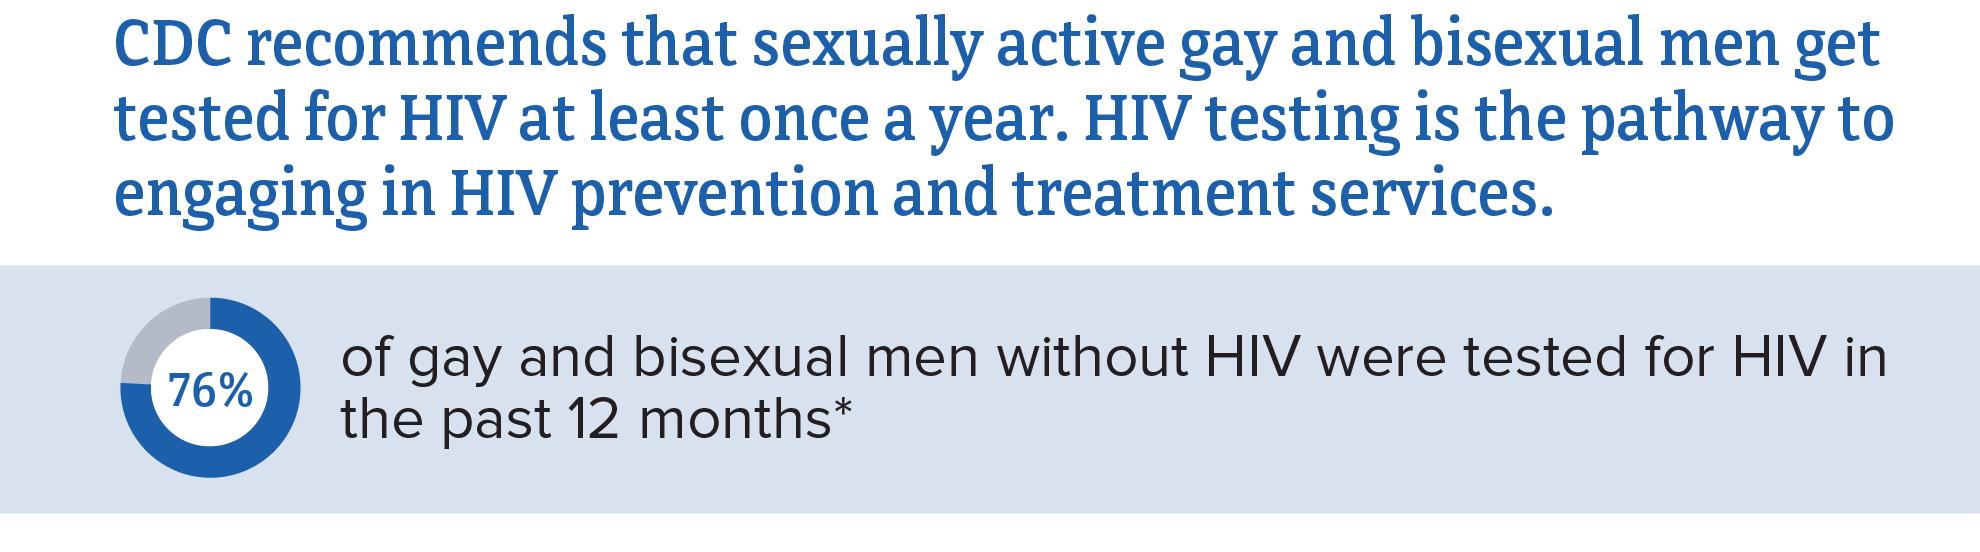 This chart shows the percentage of gay and bisexual men without HIV who were tested for HIV.